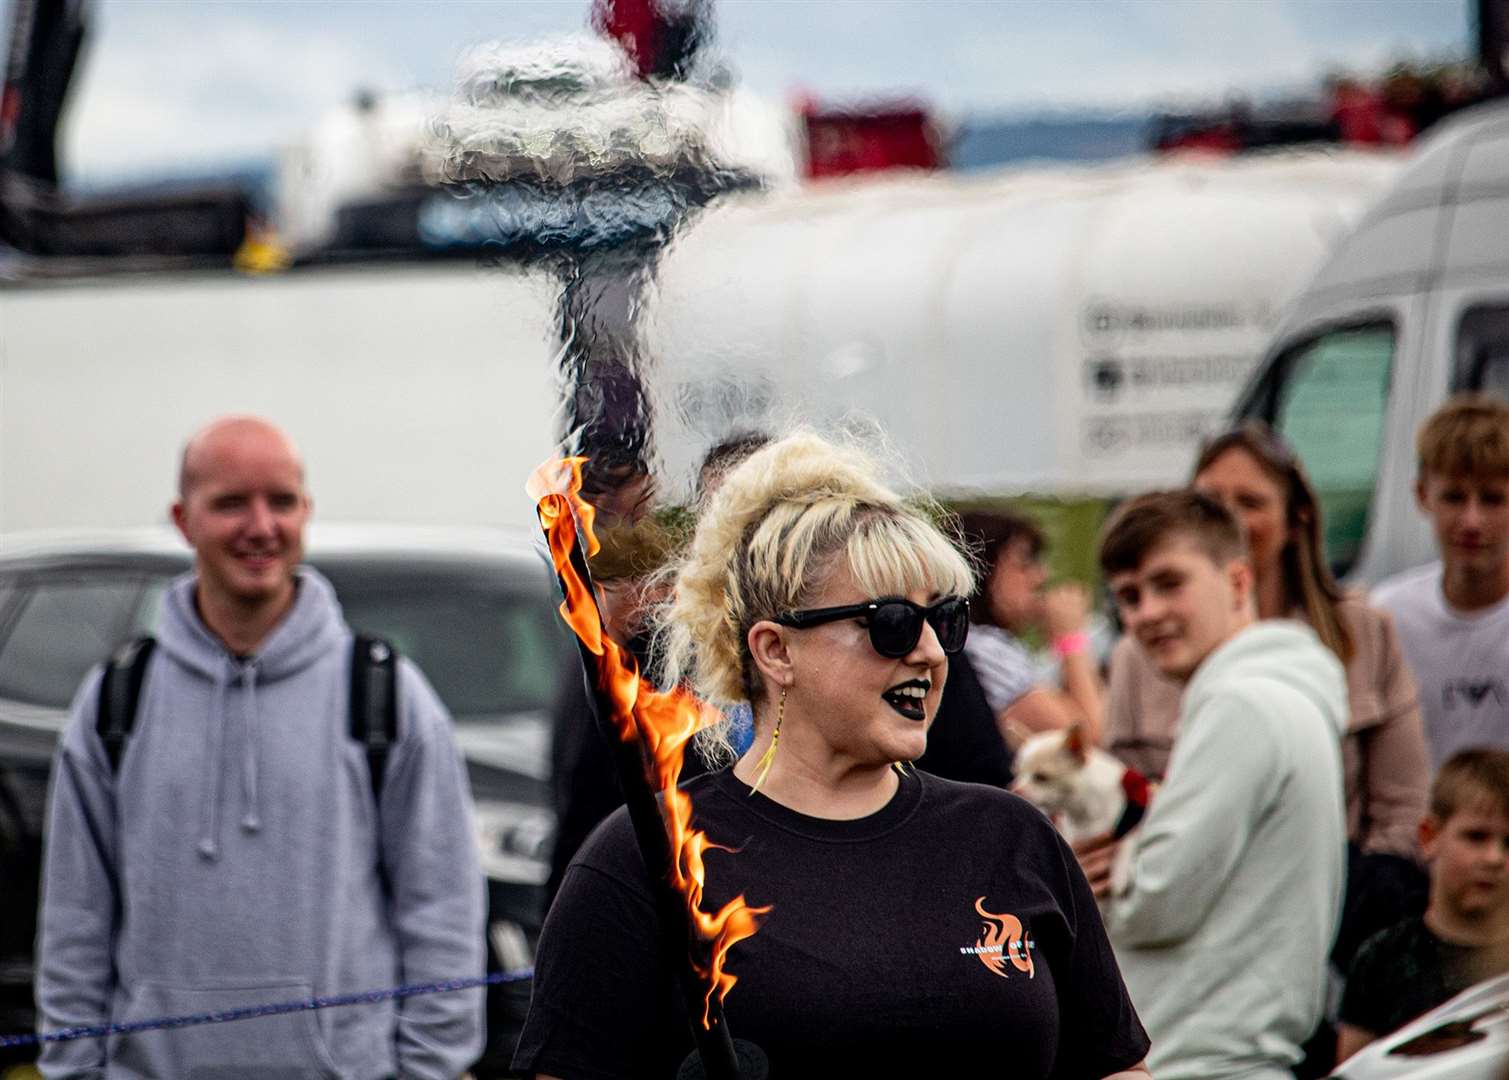 This year's side entertainment was quite literally "on fire". Photo: Niall Harkiss